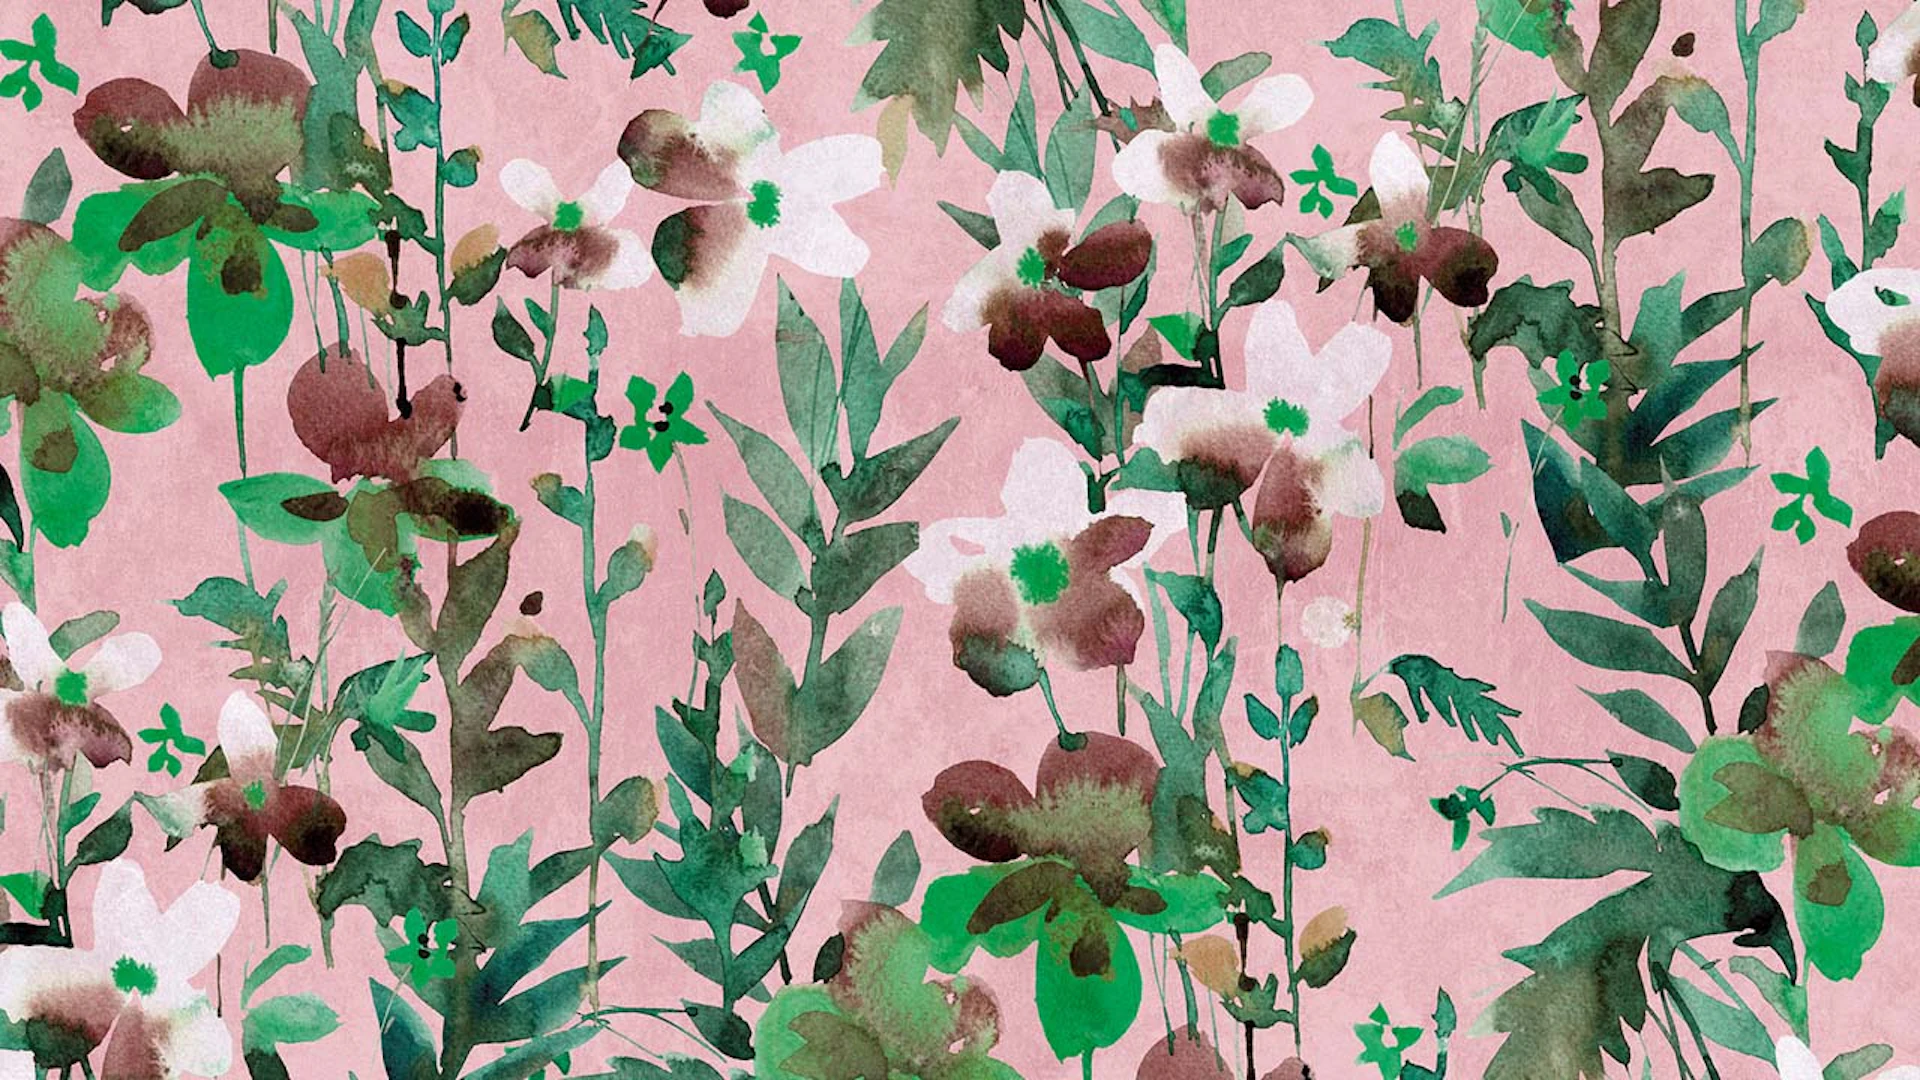 Vinyl Wallpaper The Wall Flowers & Nature Vintage Green 731